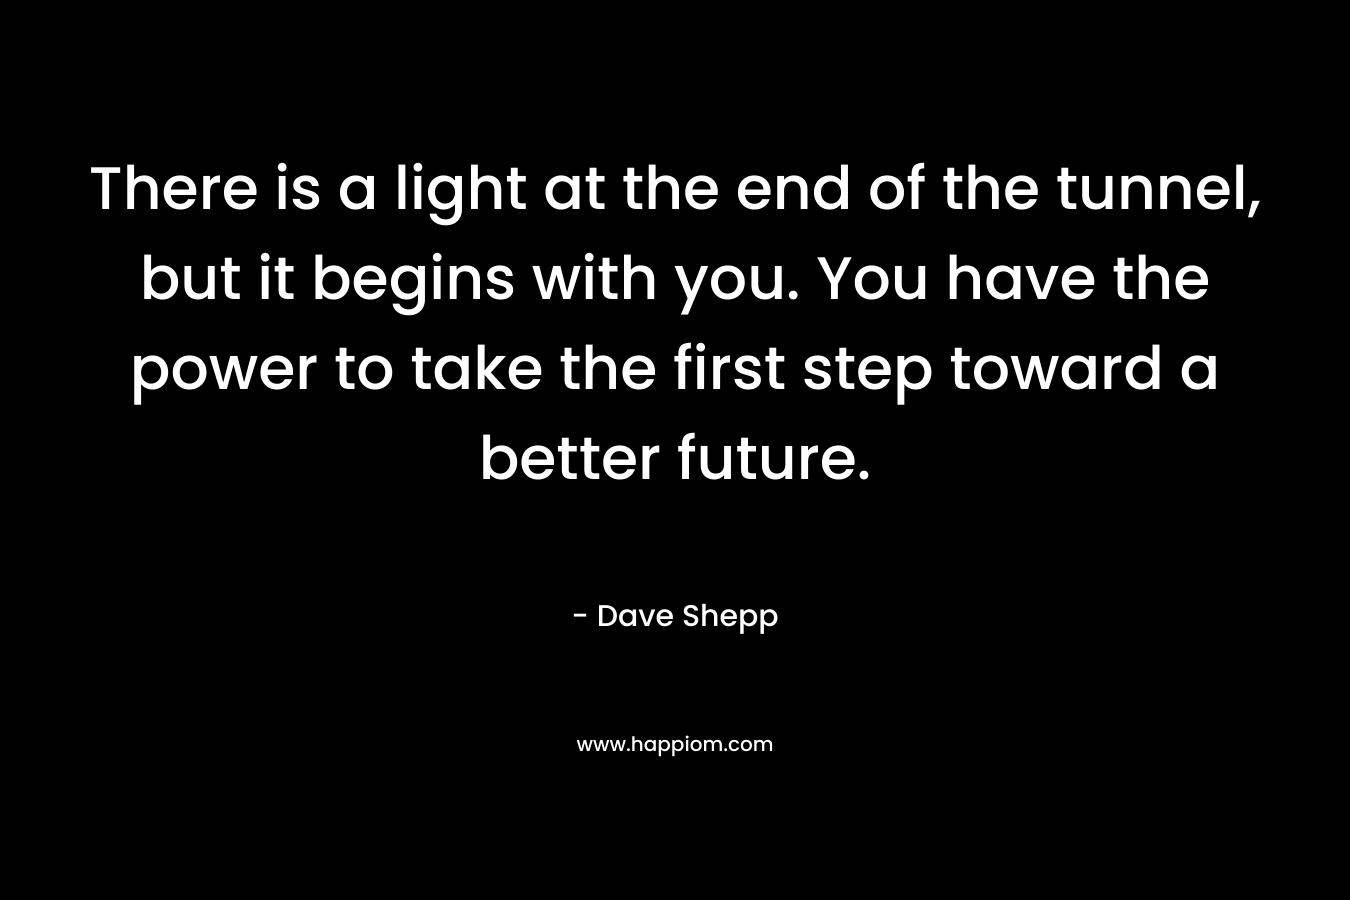 There is a light at the end of the tunnel, but it begins with you. You have the power to take the first step toward a better future. – Dave Shepp